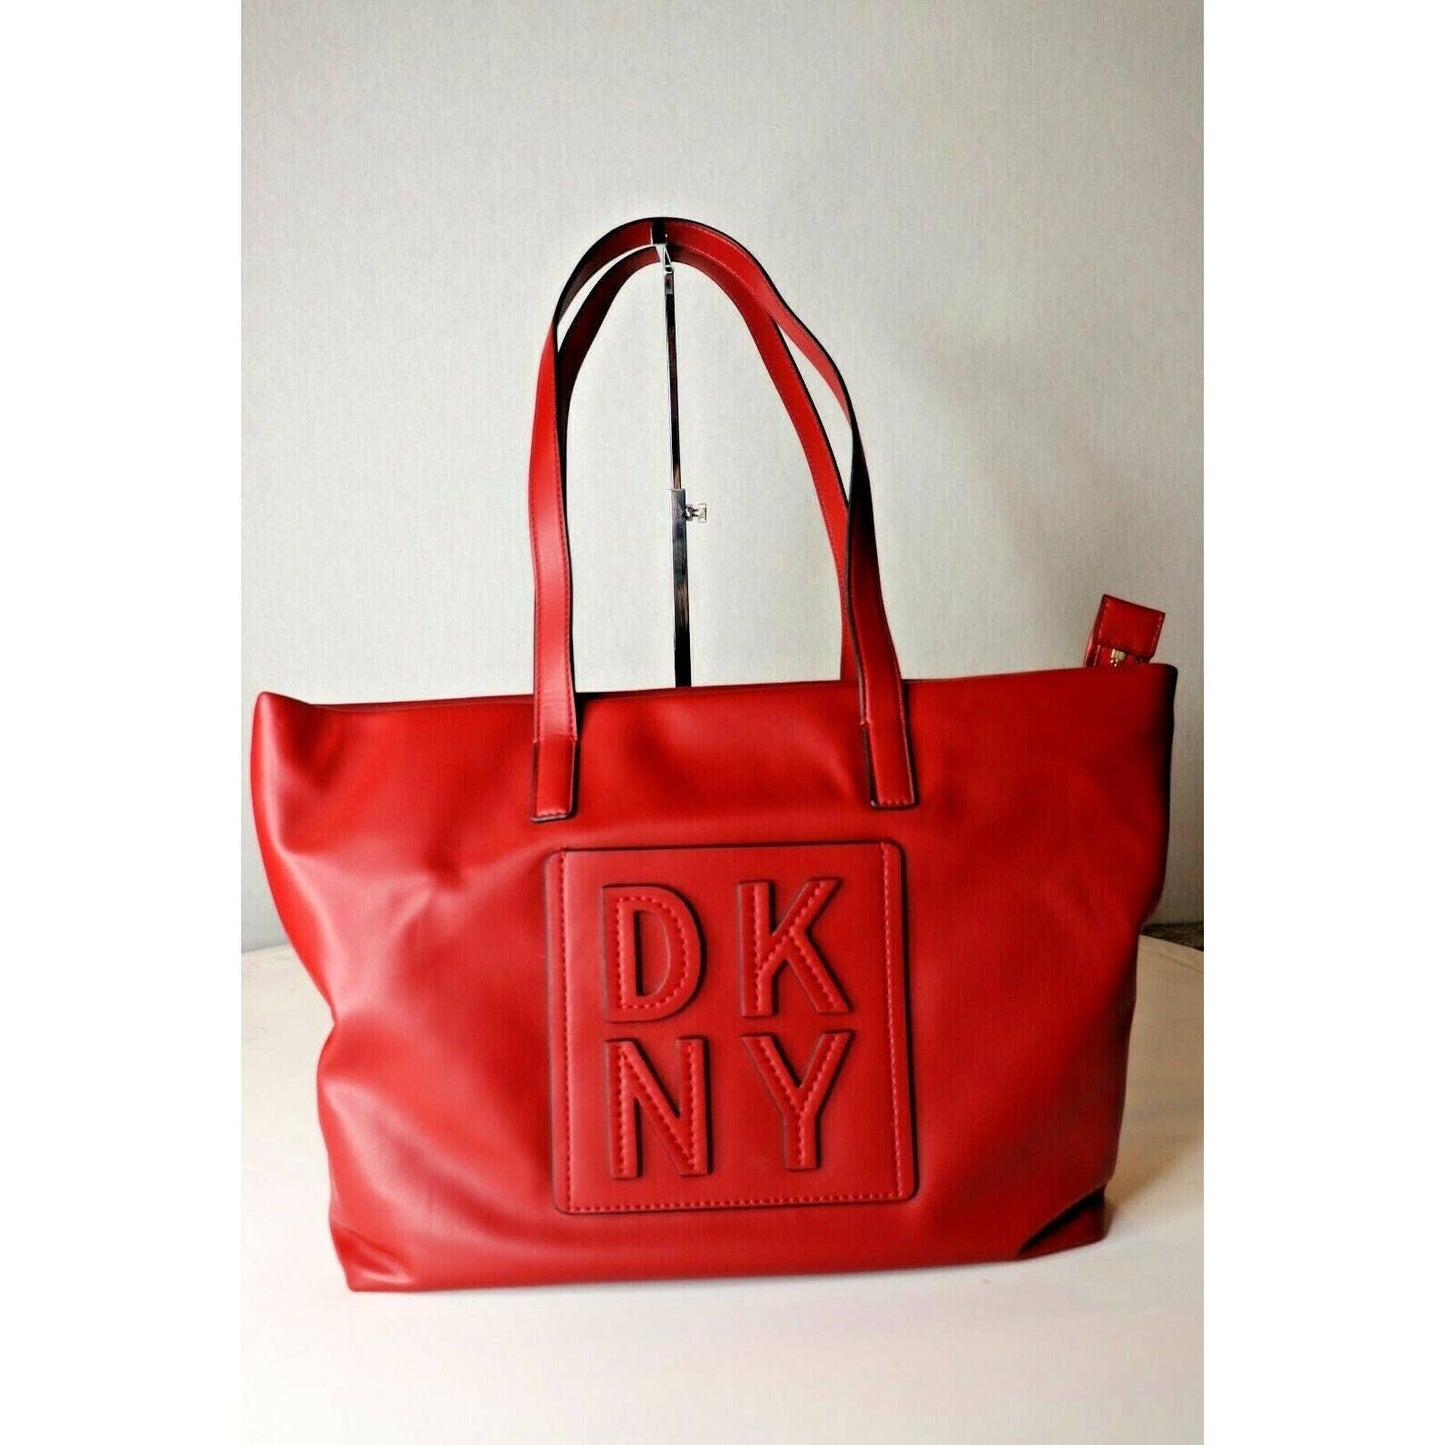 DKNY Tilly Stacked Logo Top Zip Tote, Red, NWT, $168